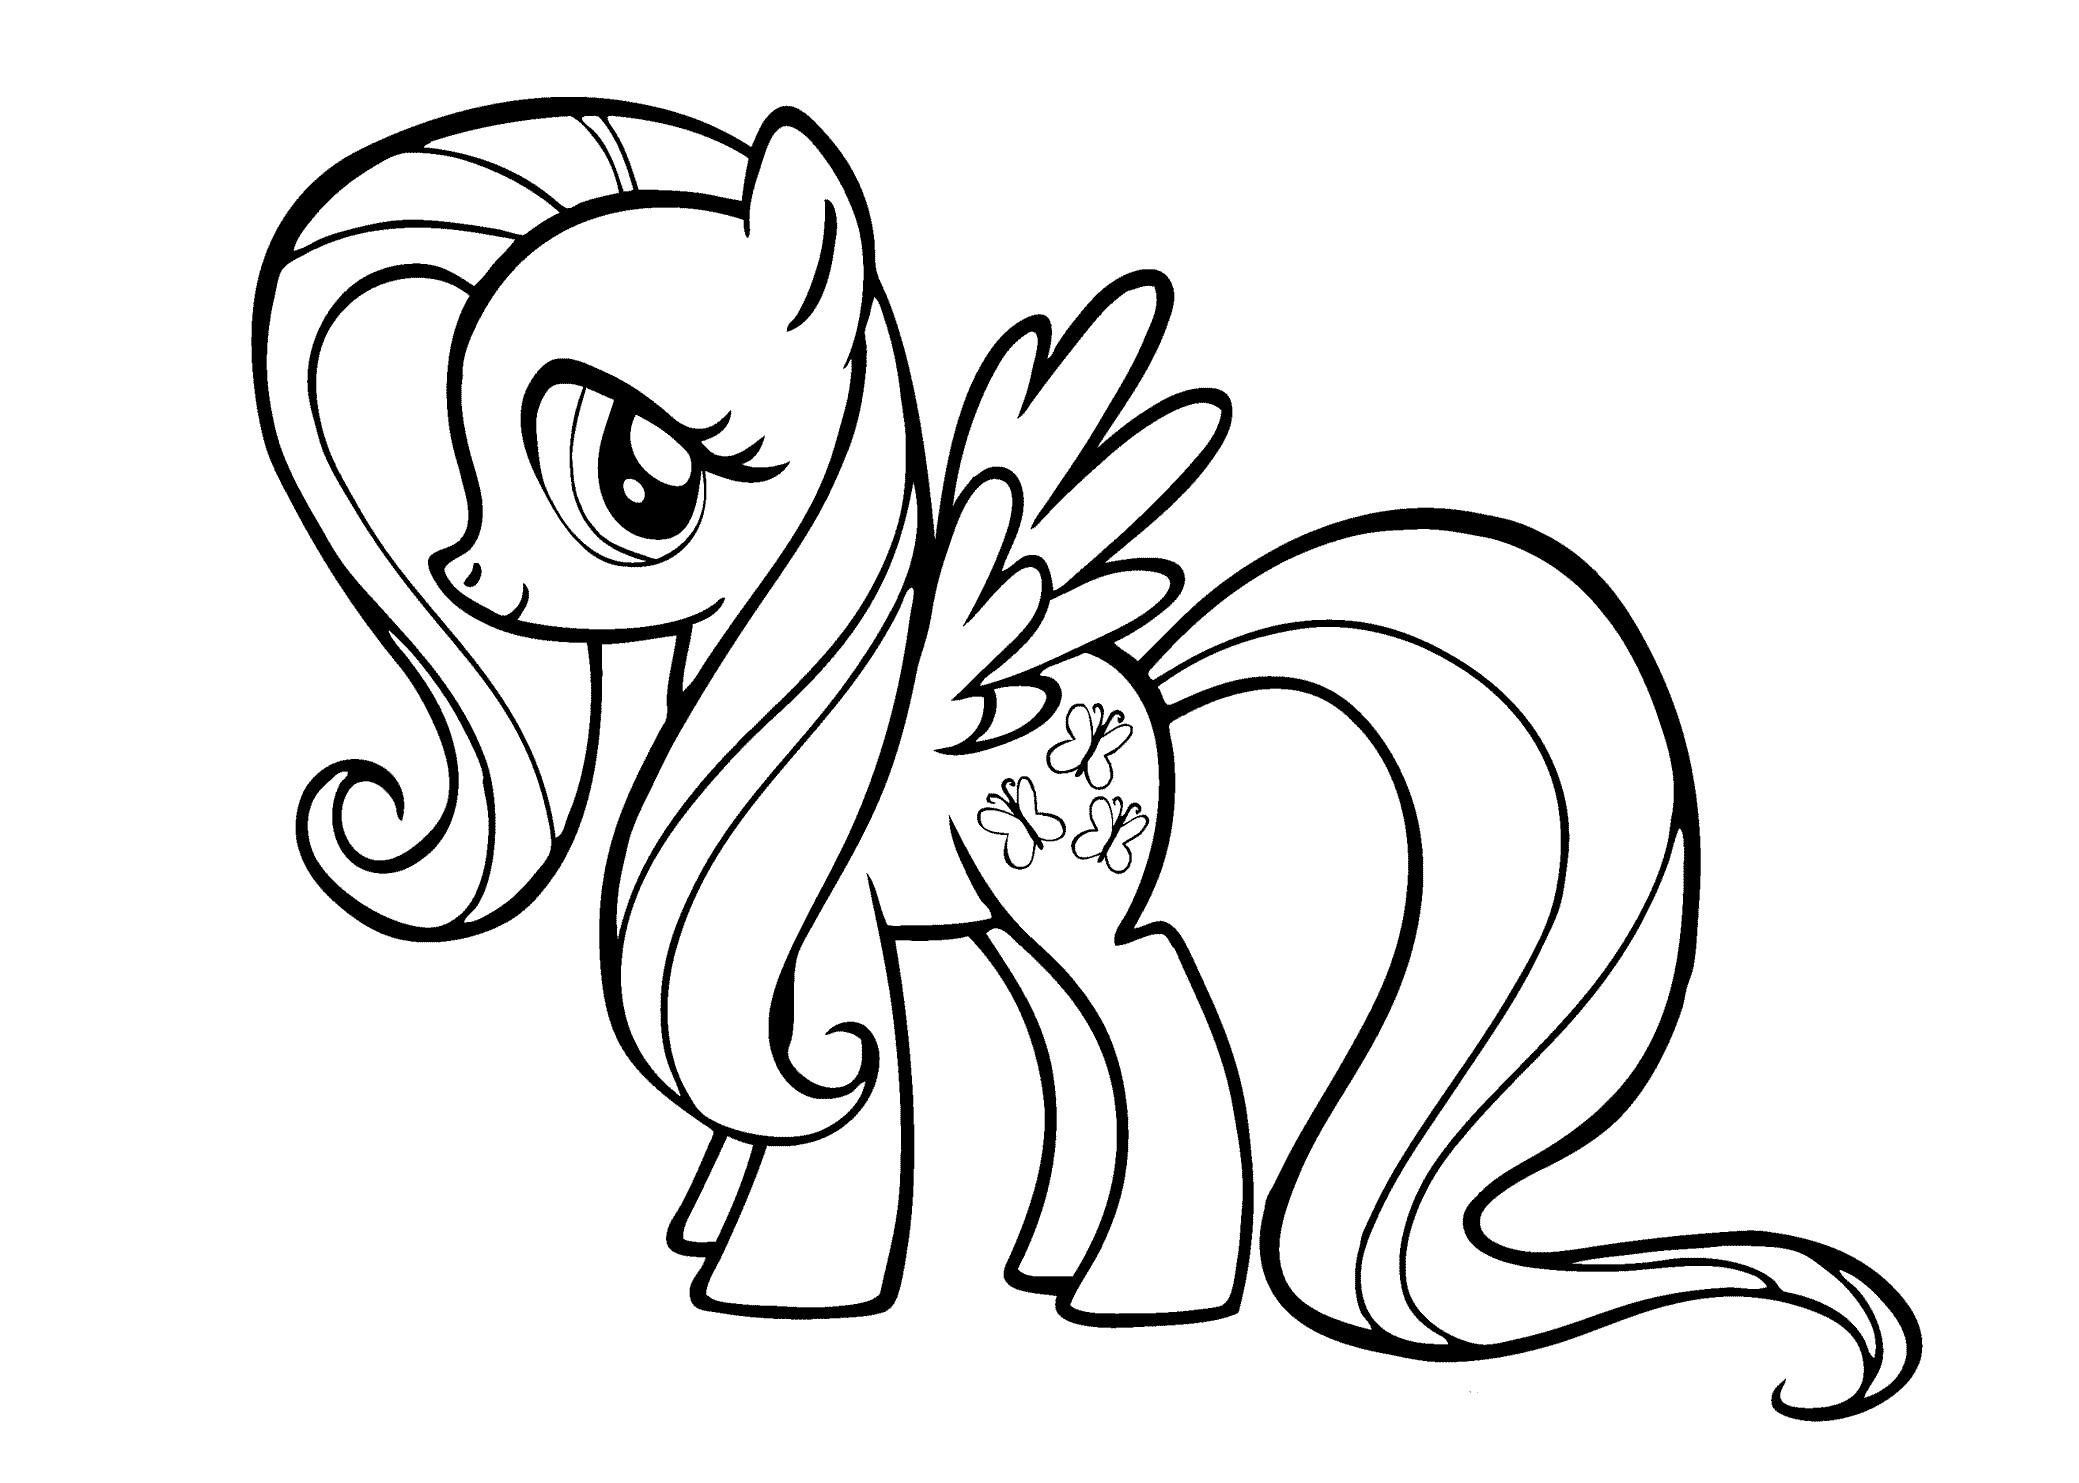 Kids Coloring Pages My Little Pony
 My Little Pony Fluttershy coloring pages for kids